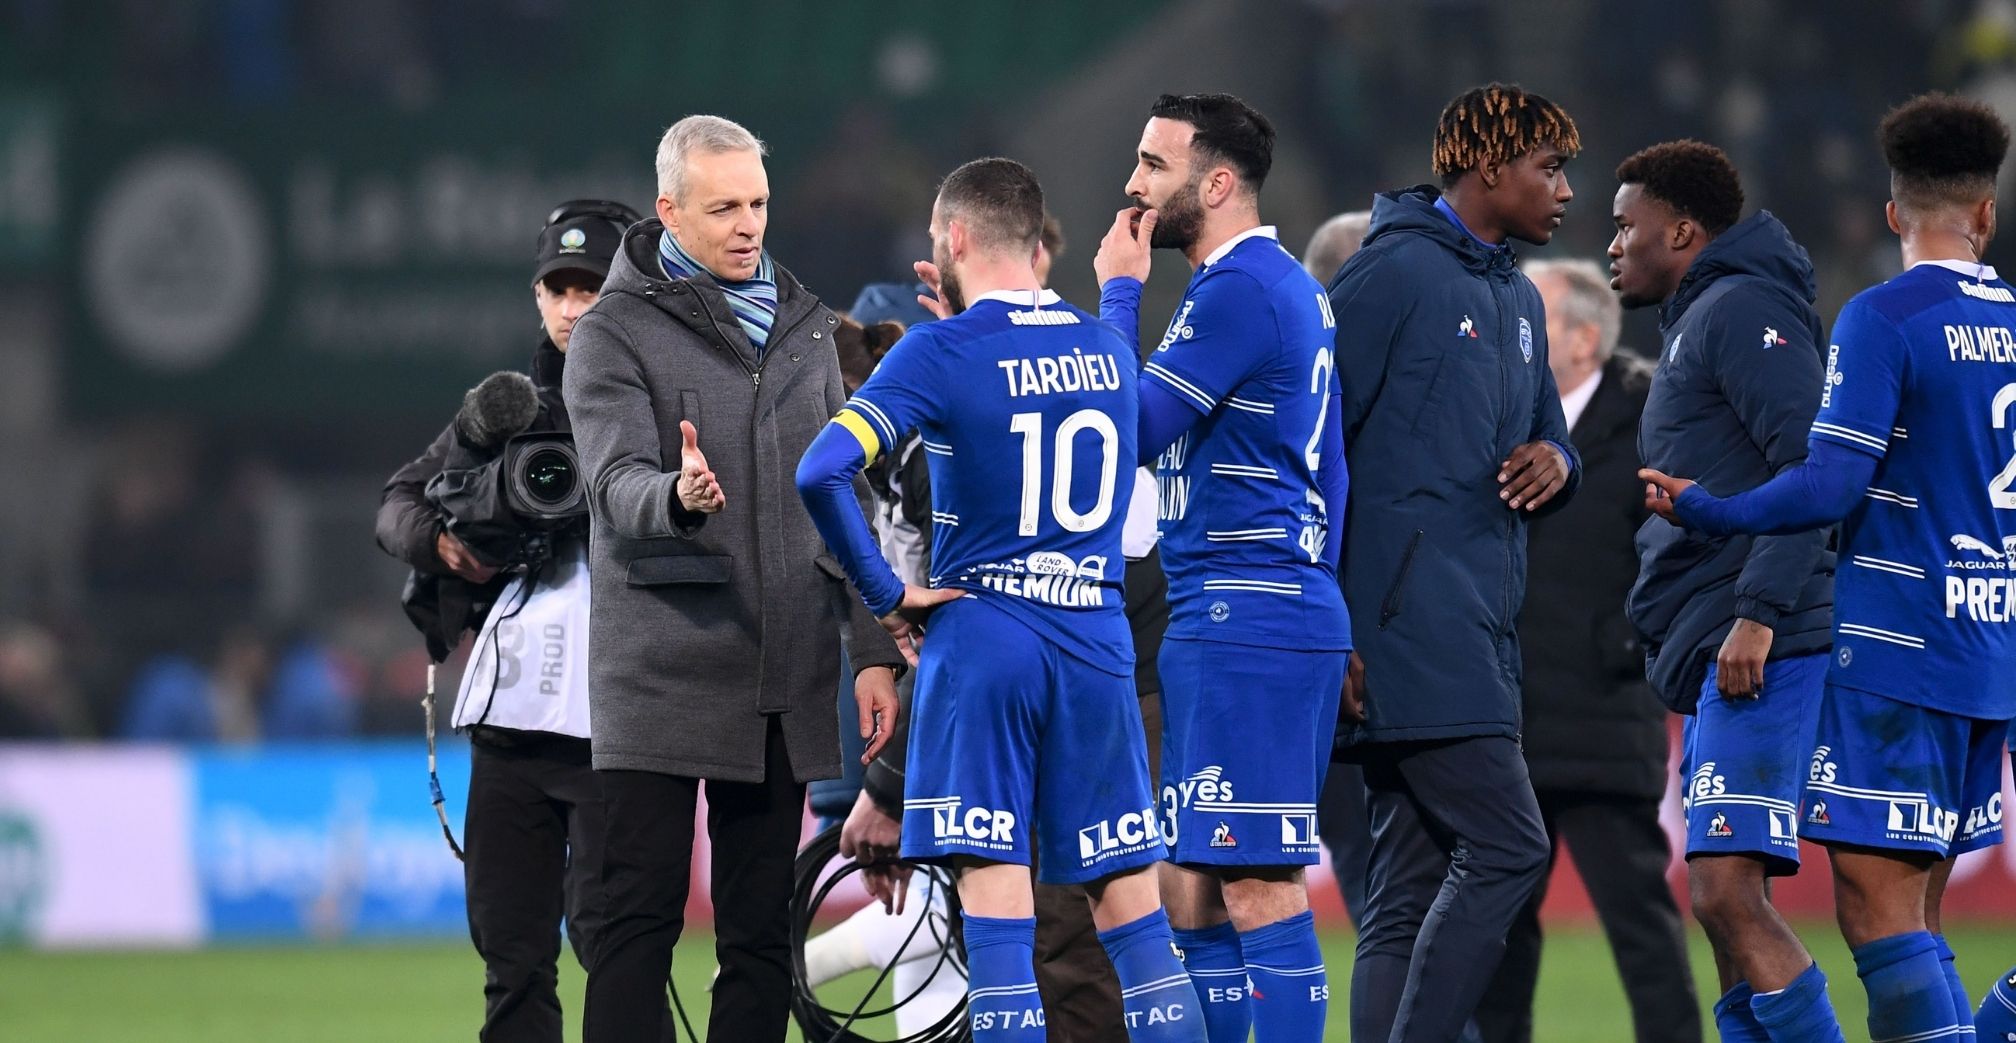 Troyes boss Irles: 'We're moving forward'